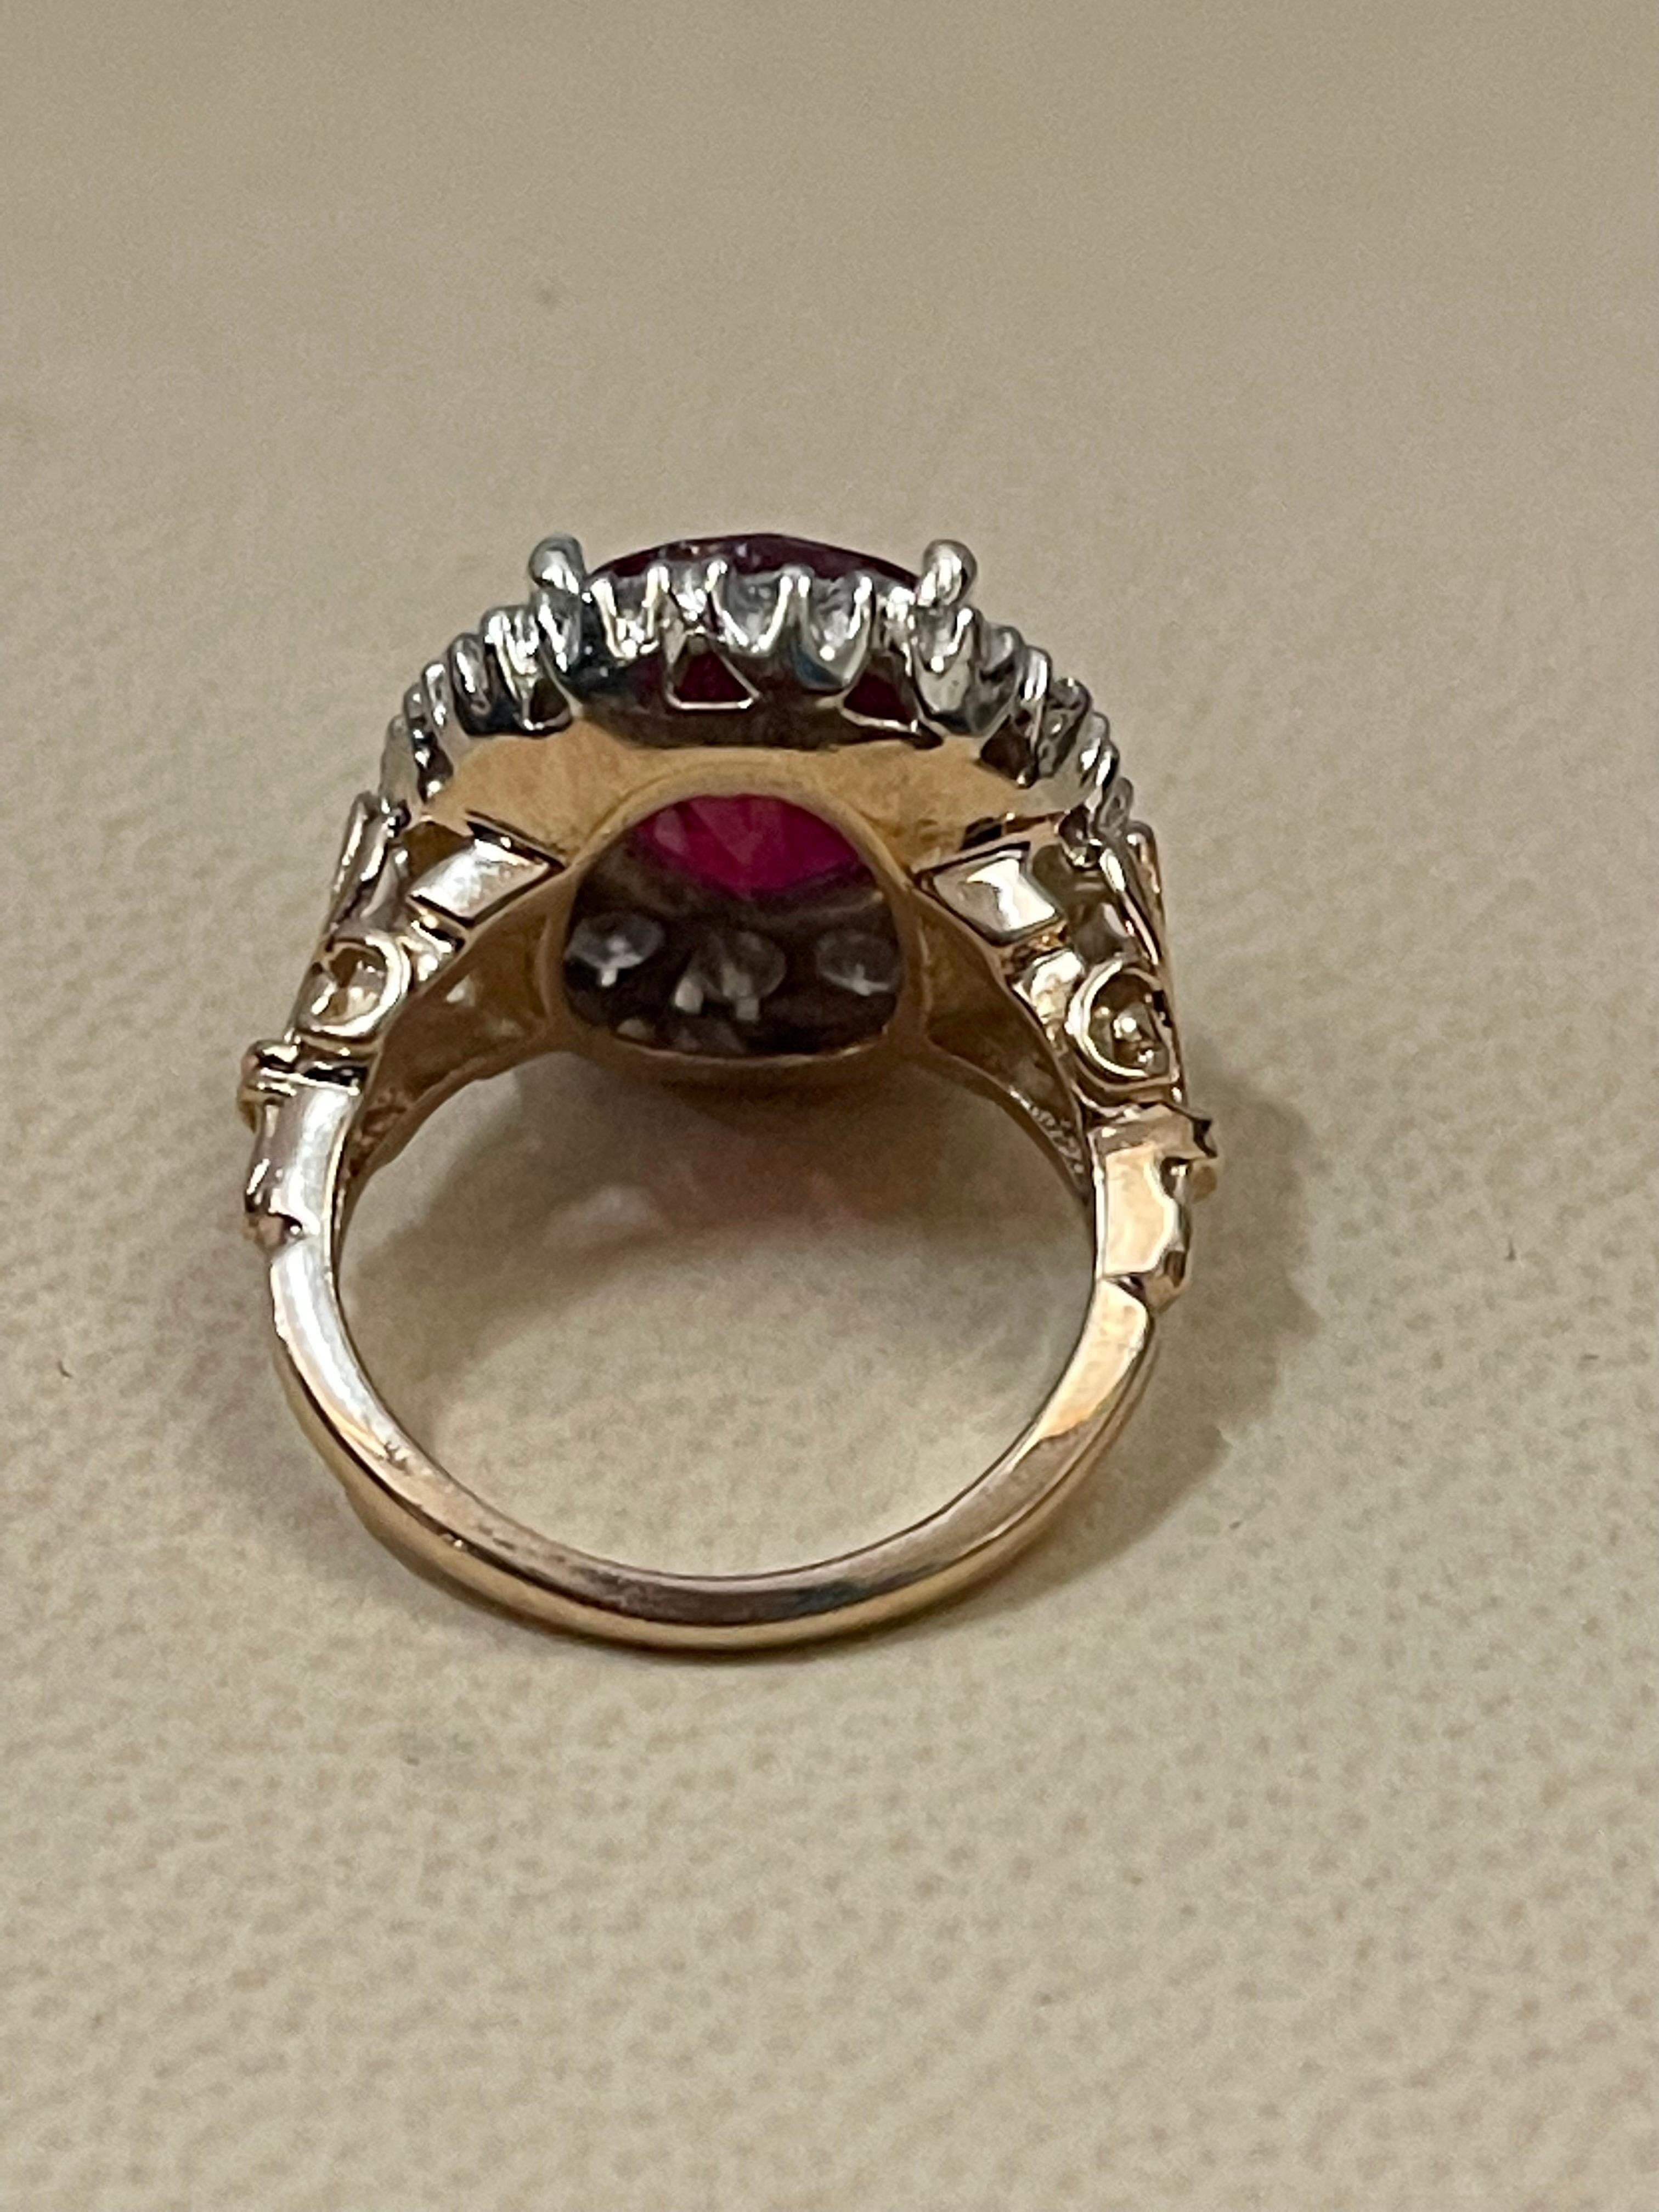 Oval 8 Carat Treated Ruby and 1 Carat Diamond 14 Karat Two Tone Gold Ring For Sale 6